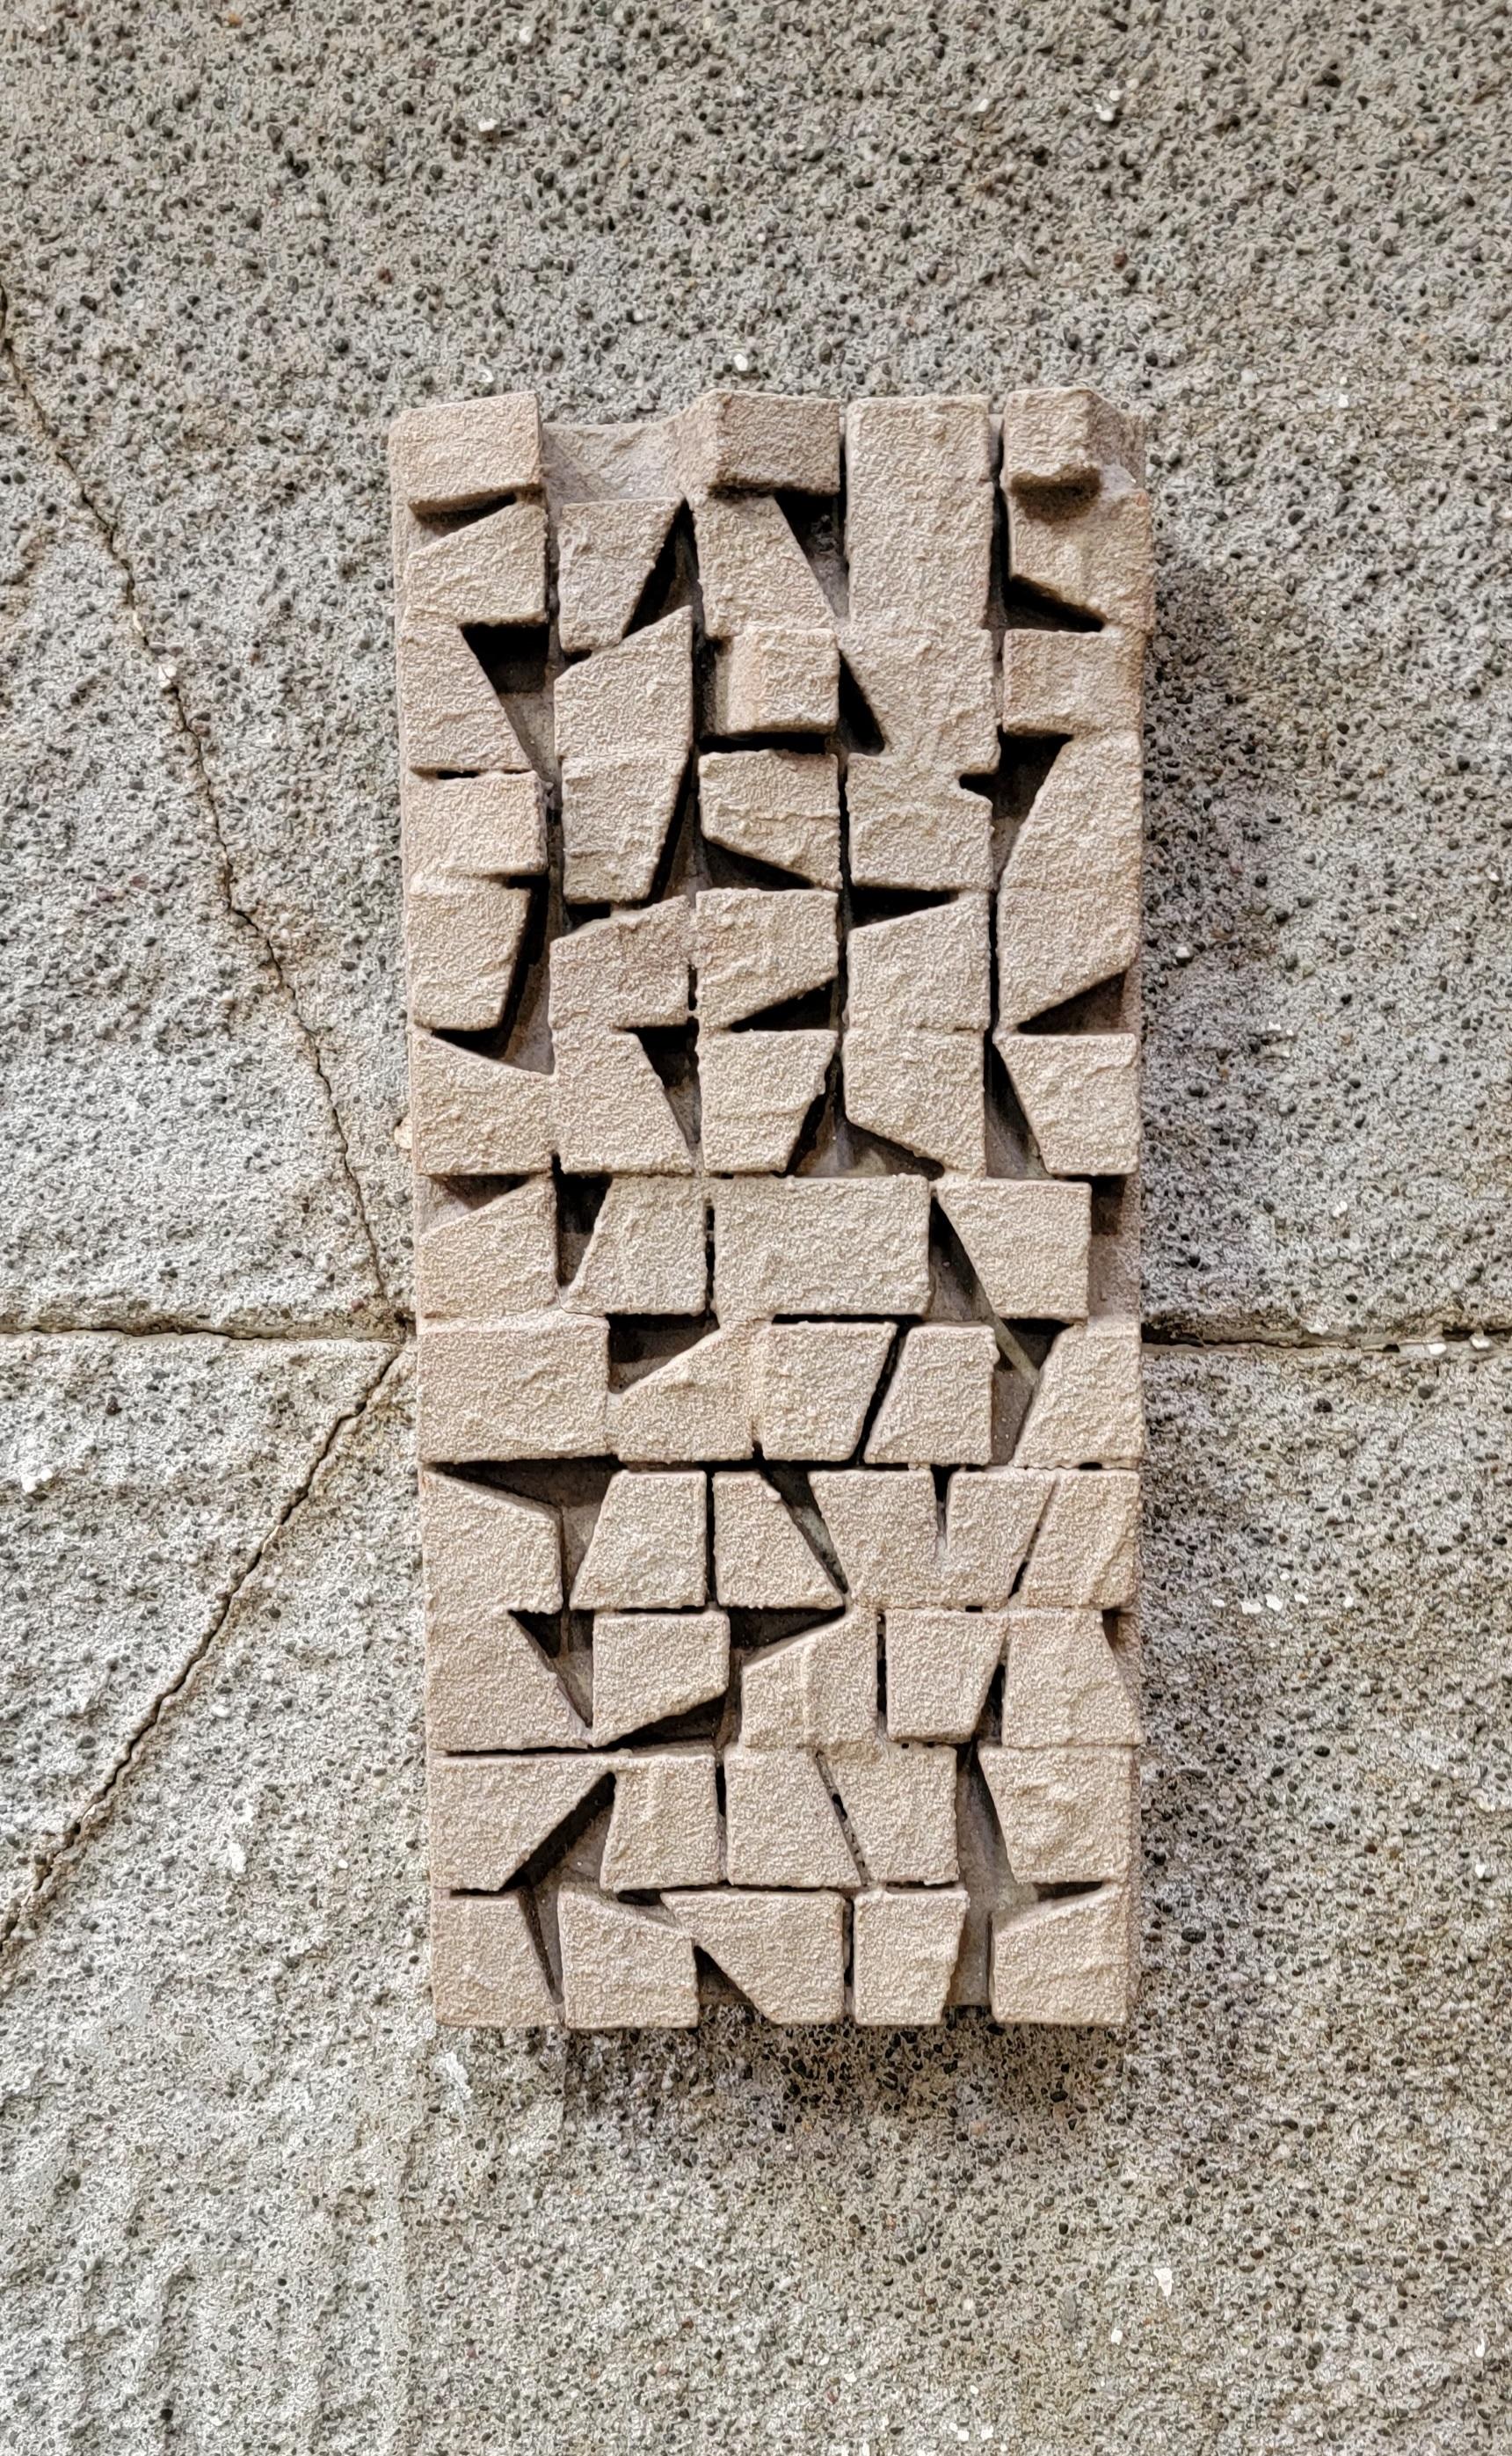 A wood wall sculpture by documented California artist Richard Faralla. Exhibited and works held San Francisco Museum of Modern Art. Acquired from a personal friend and student of Faralla. Faralla's later years were spent in West Sonoma County wine